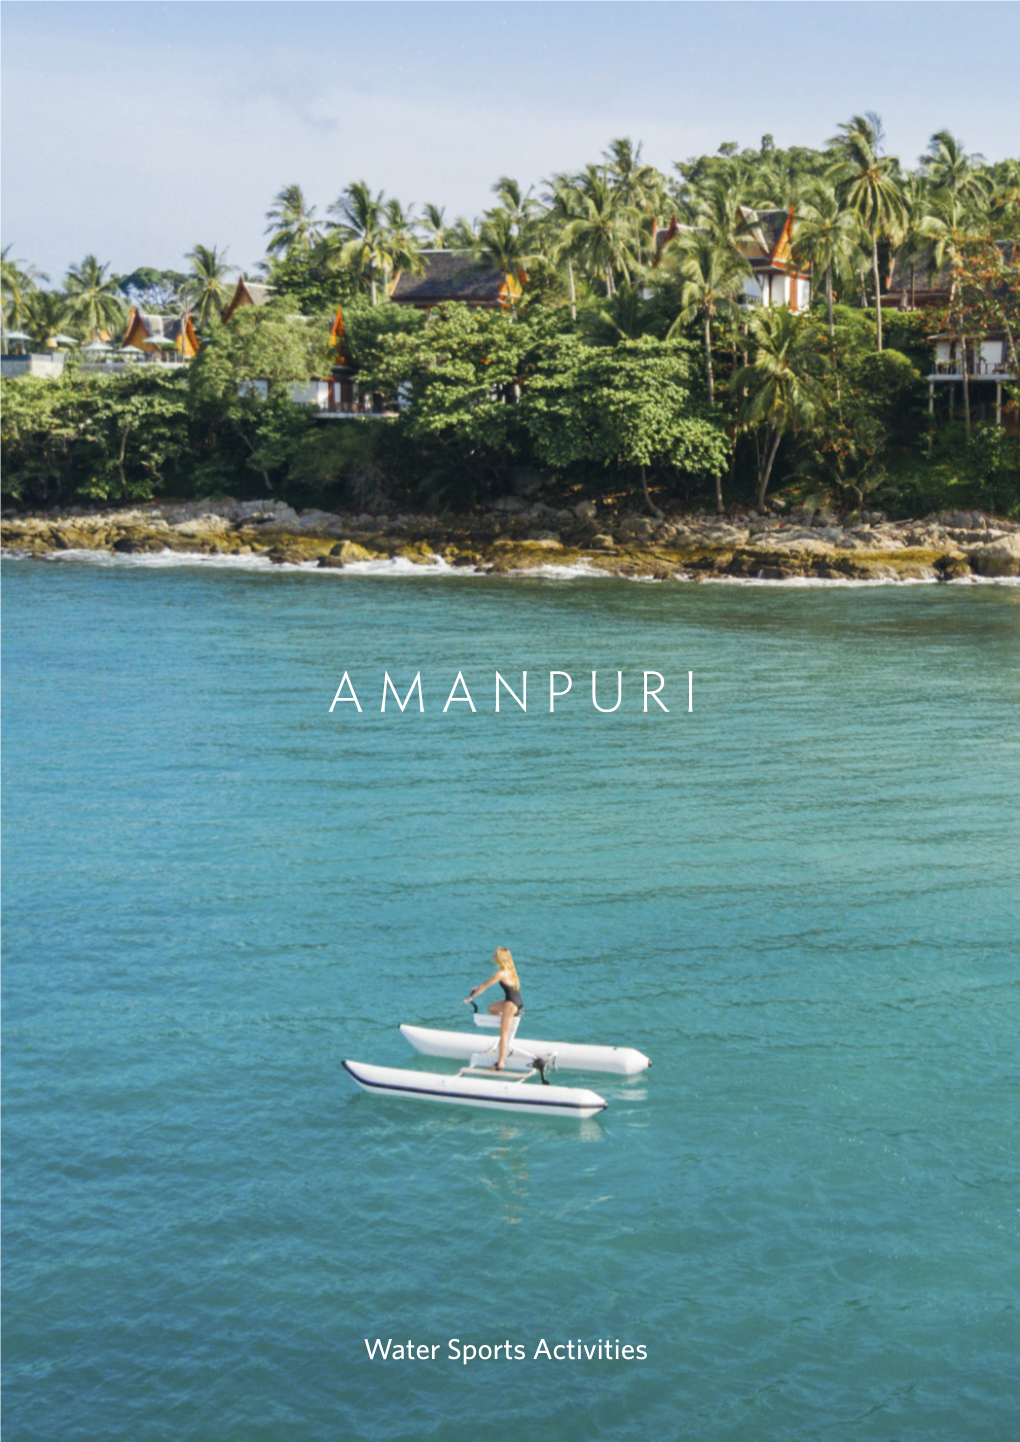 Water Sports Activities HIGHLIGHTS at AMANPURI COMPLIMENTARY WATER SPORTS YOGA